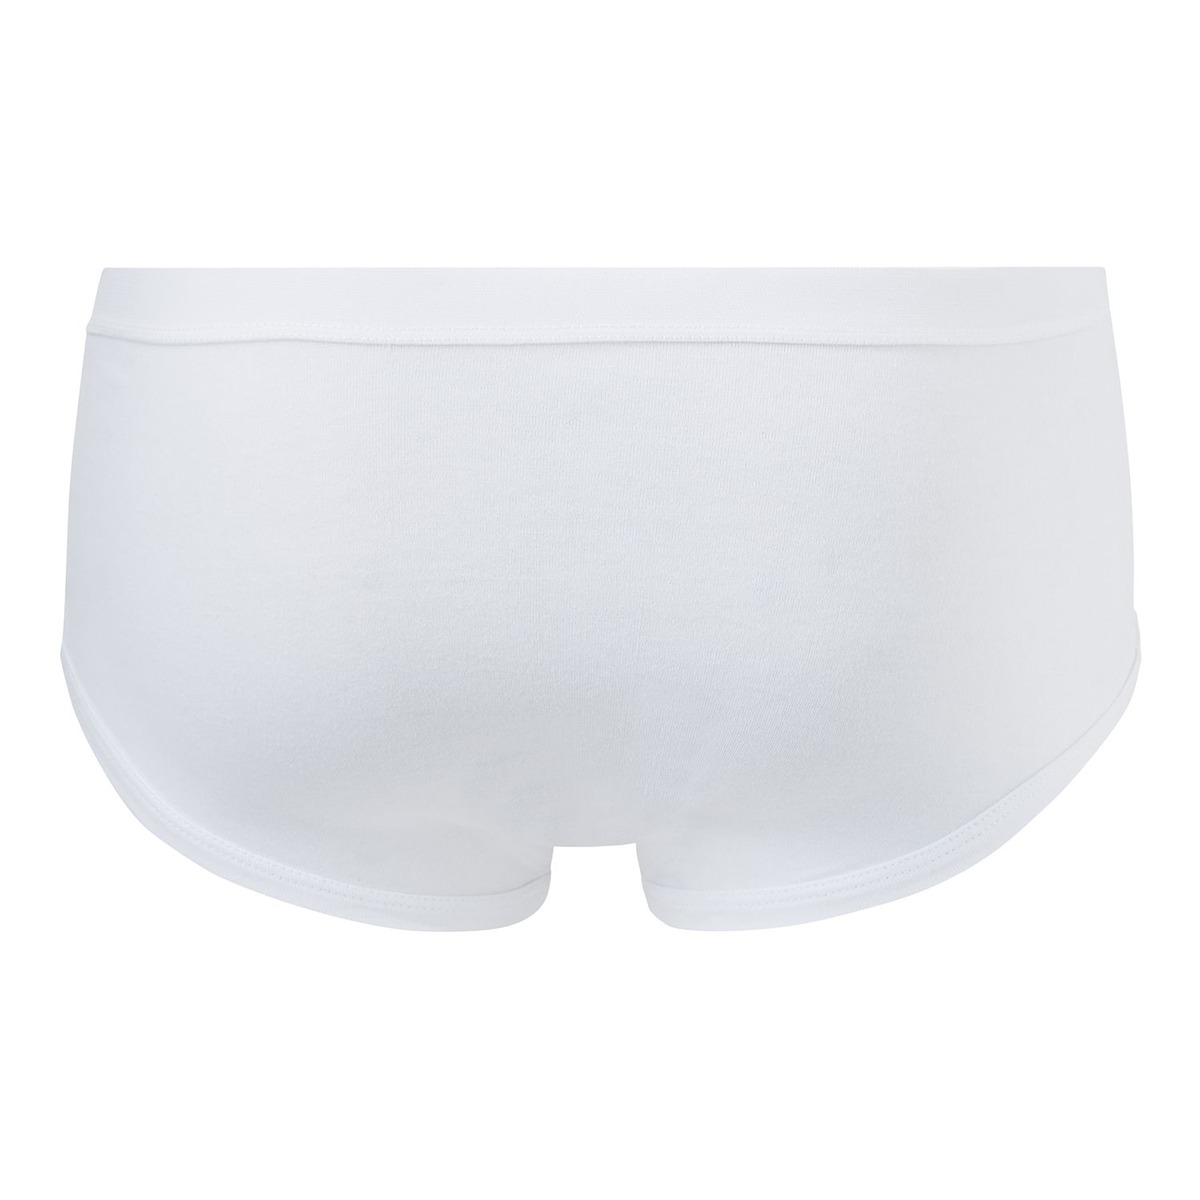 Drylife Lady Washable Lace Incontinence Underwear